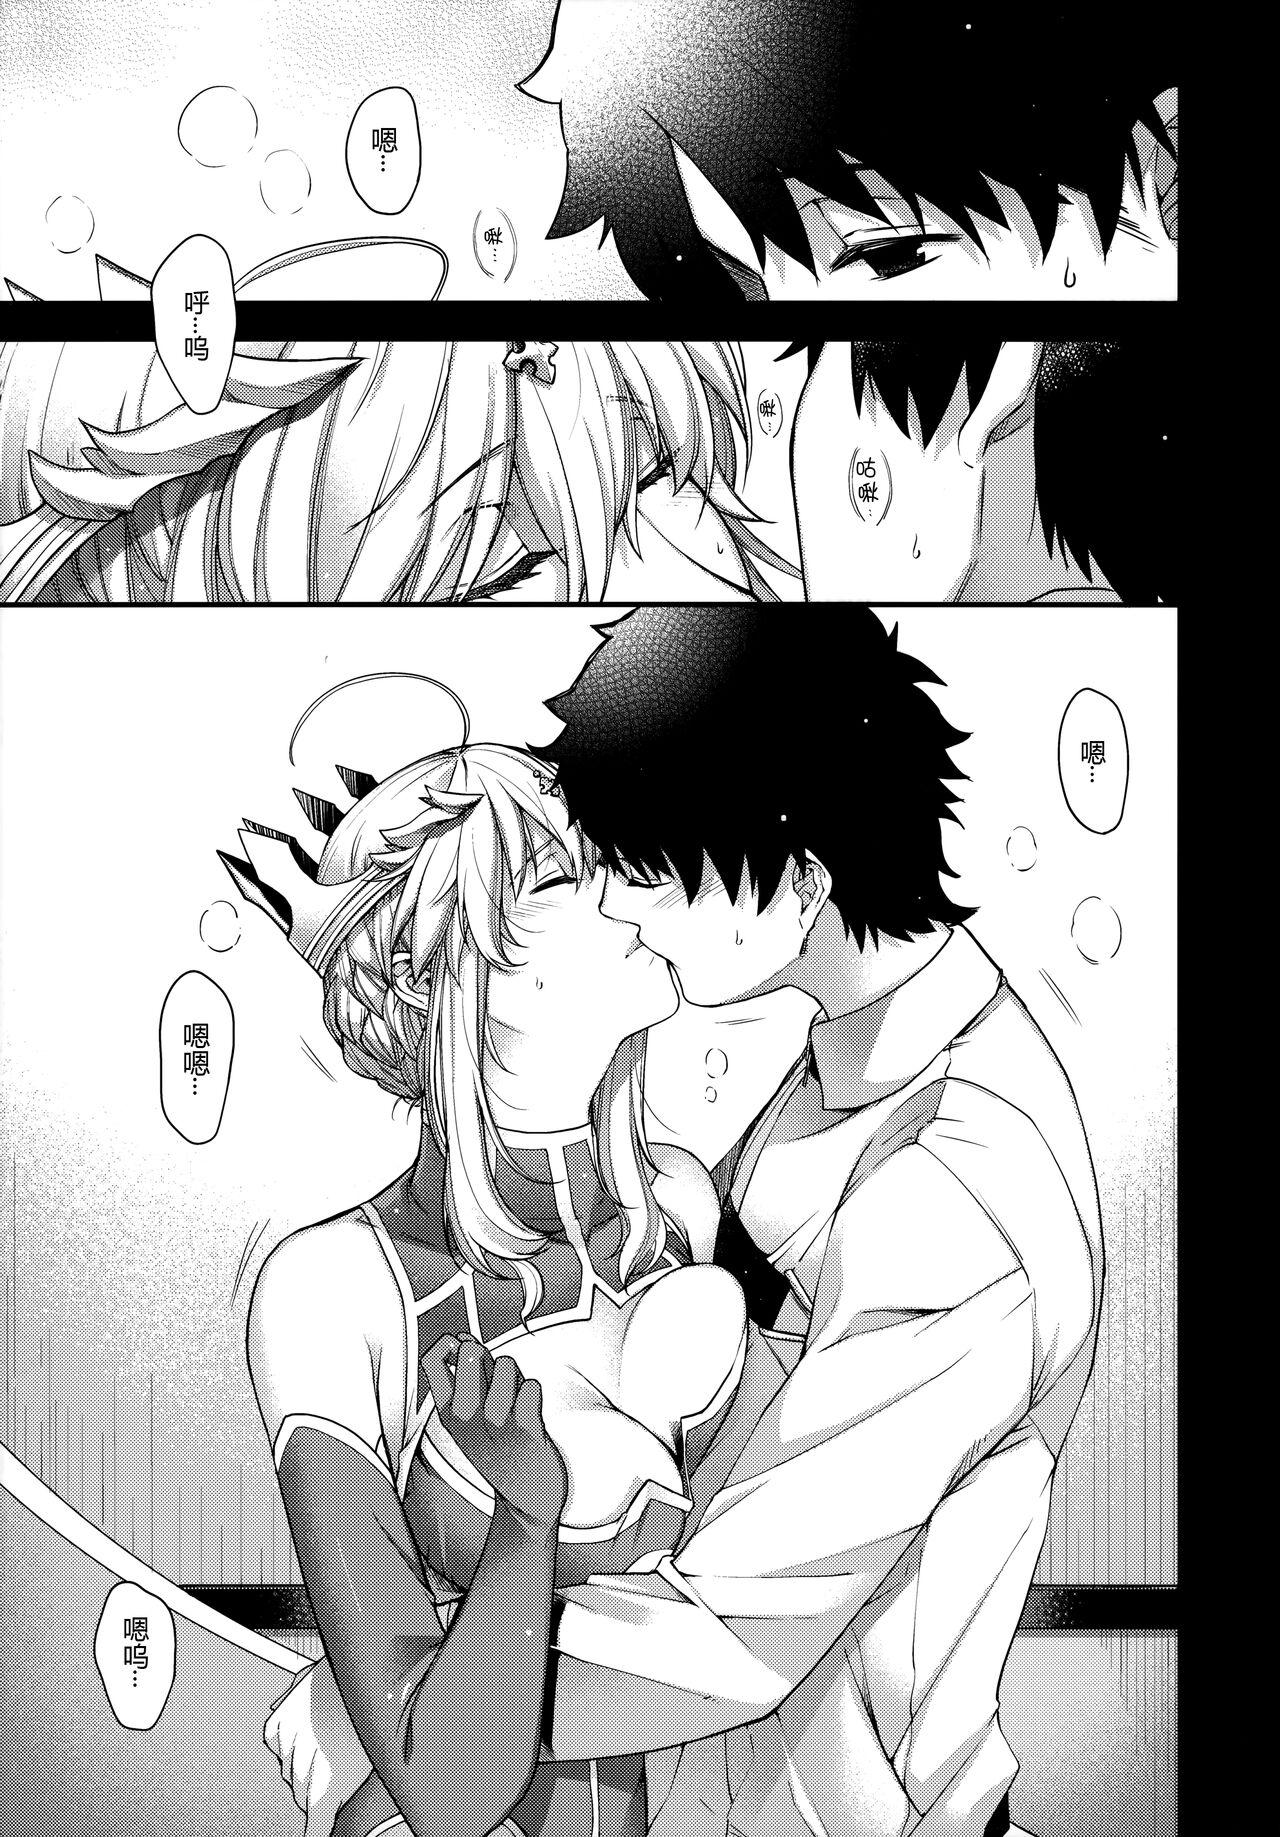 Hidden Camera Royal syndrome - Fate grand order Free Hardcore Porn - Page 6